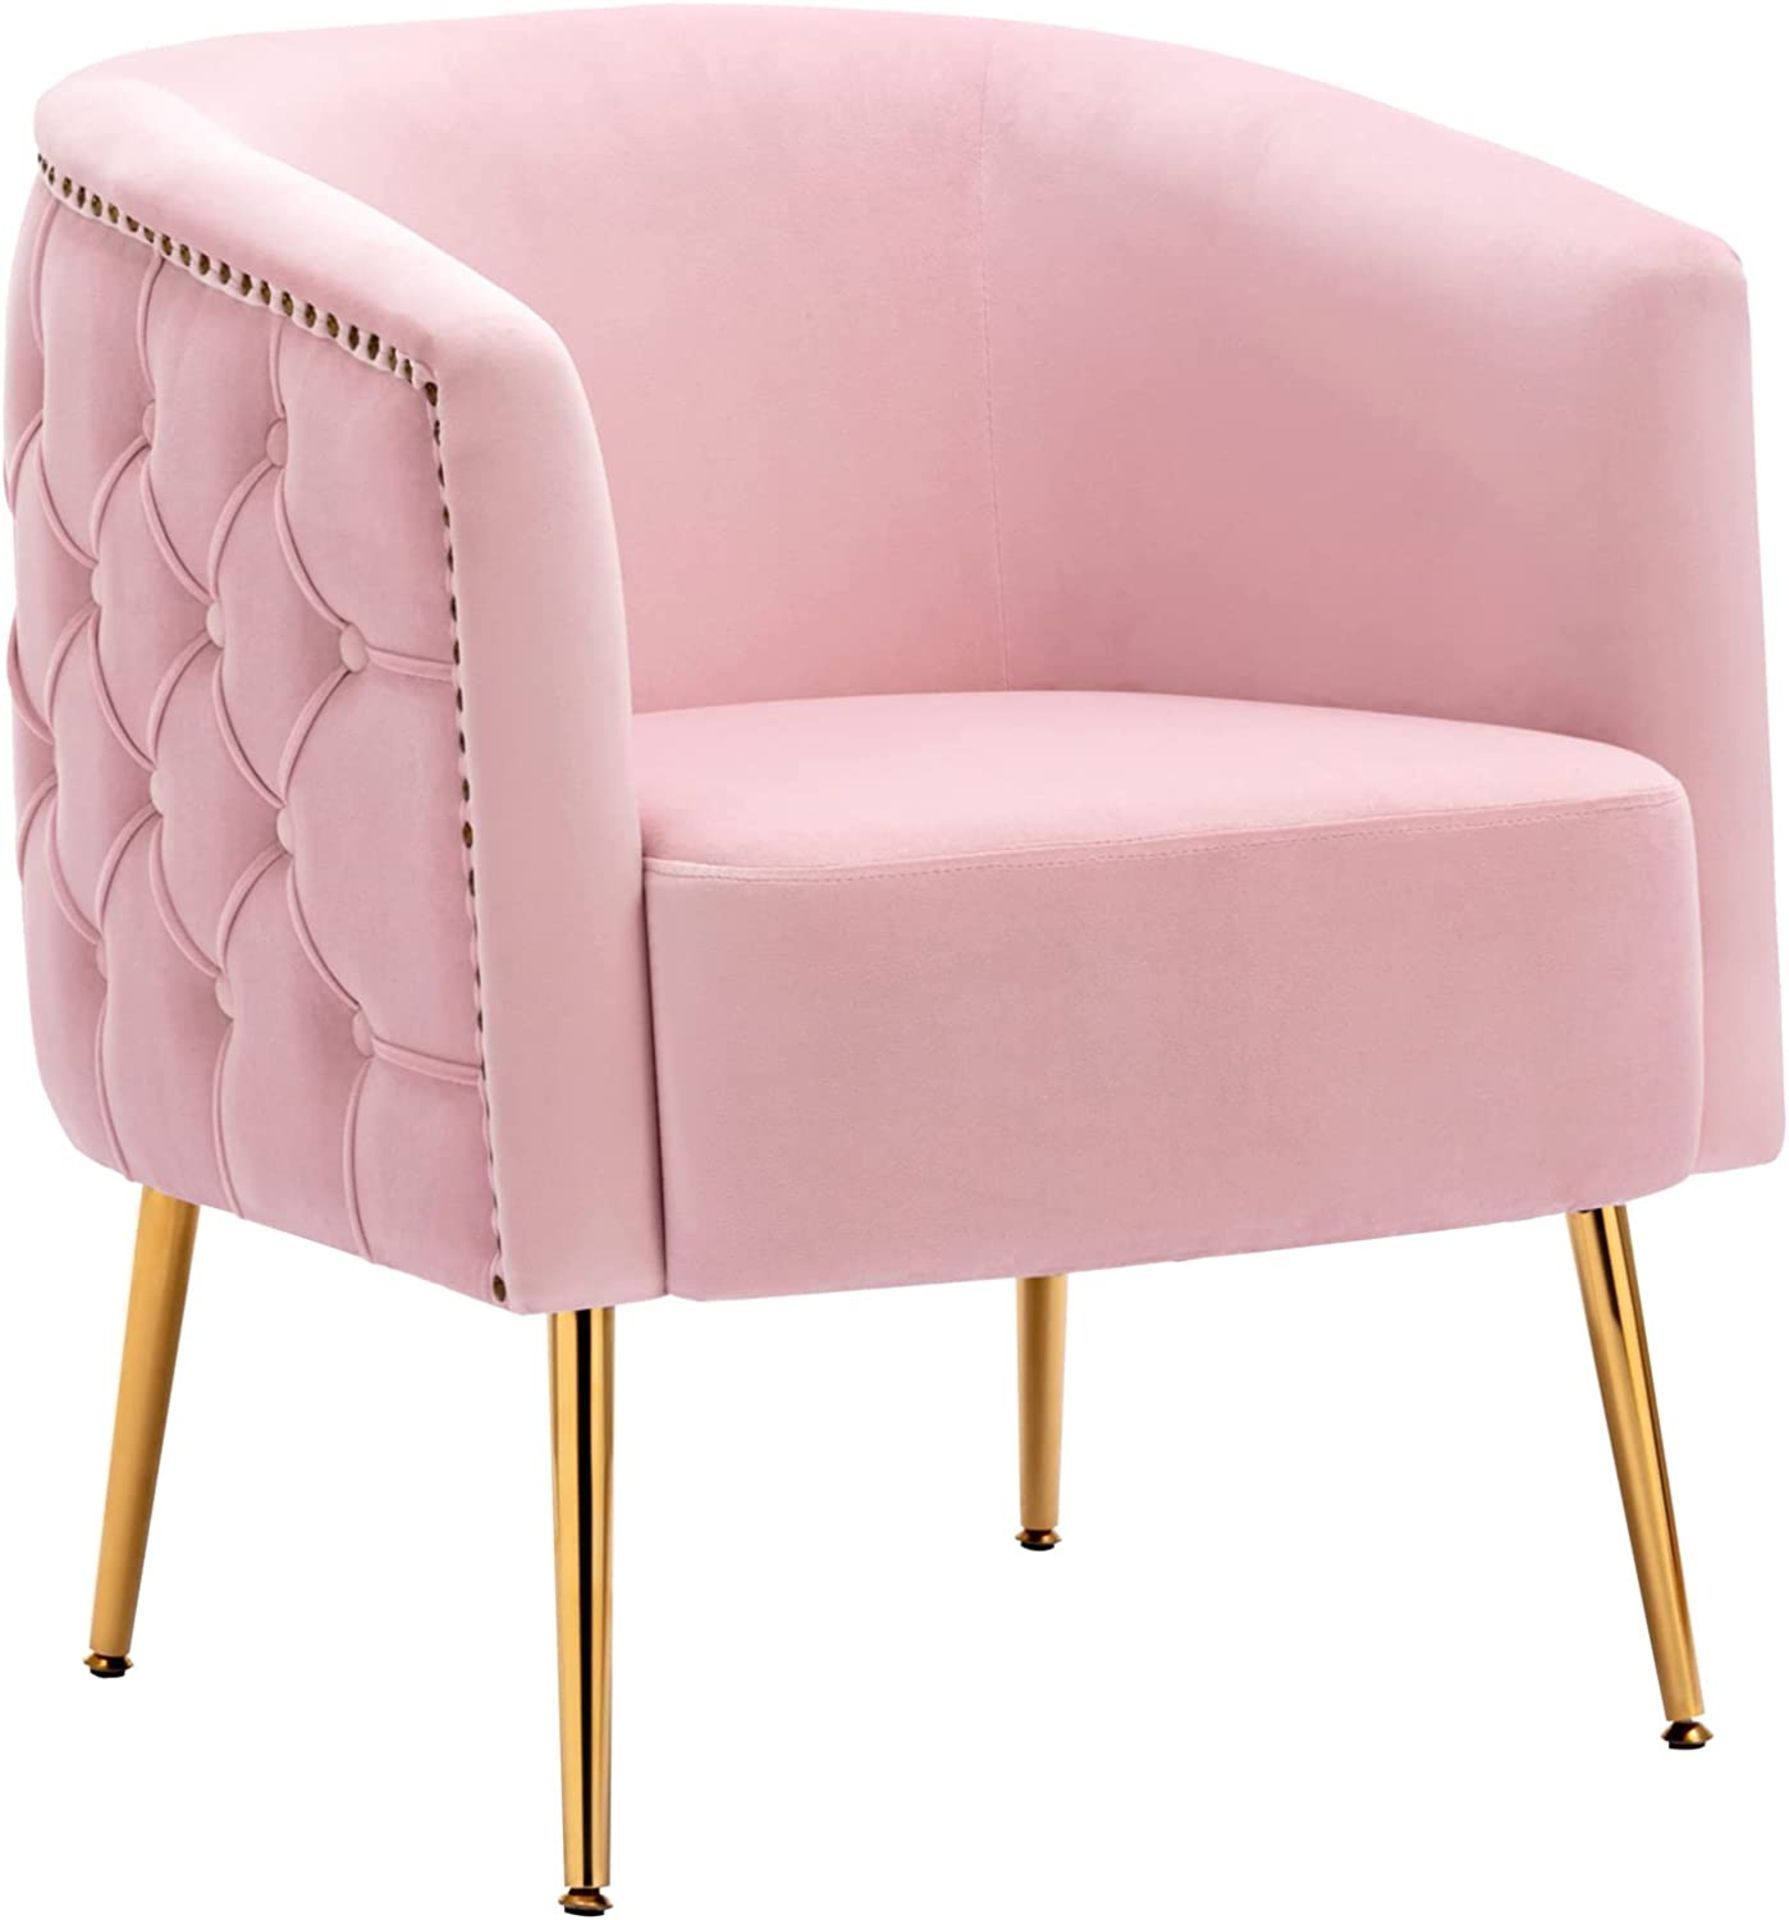 NEW Oryxearth Velvet Barrel Chair Modern Accent Chair with Golden Metal Legs Upholstered Tufted